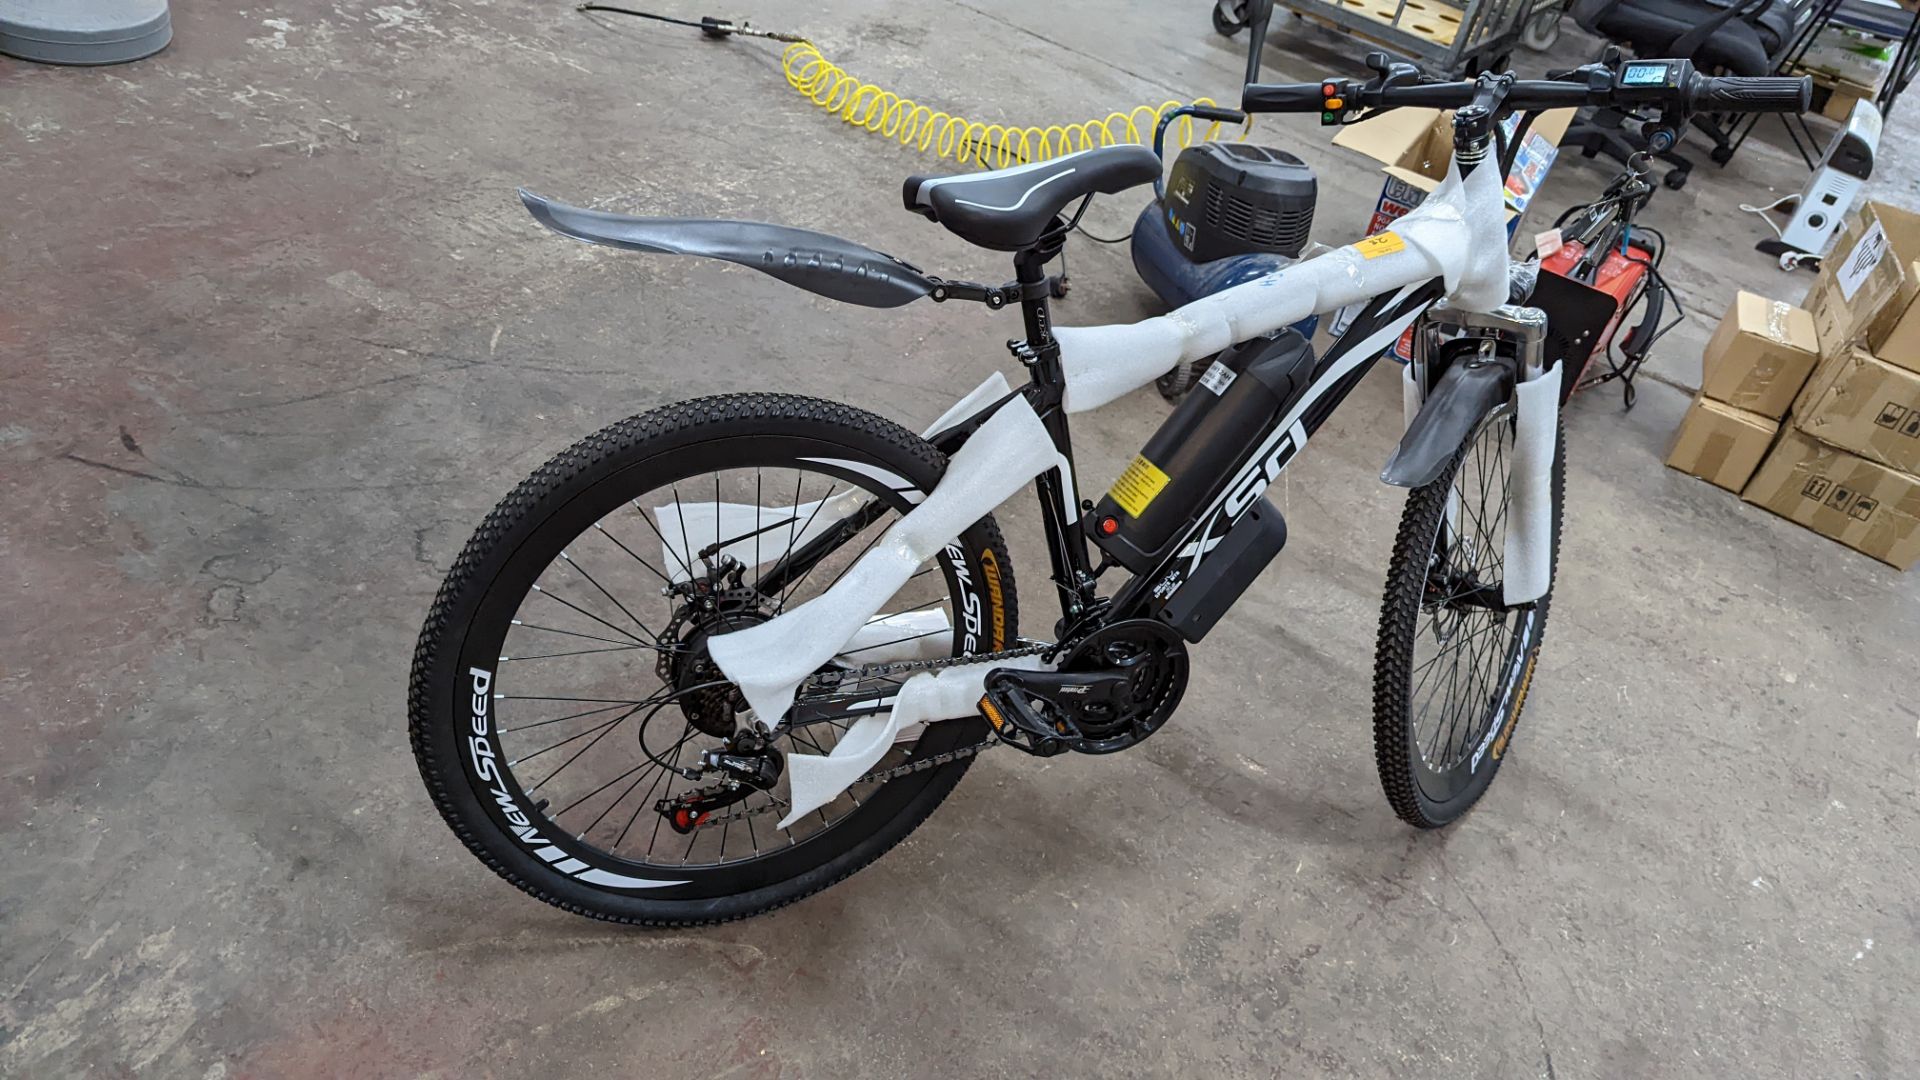 XSD FTX Sport MTB 7.5 Racing electric bike with Shimano Tourney TZ gears. Includes 36v 12AH battery, - Image 6 of 22